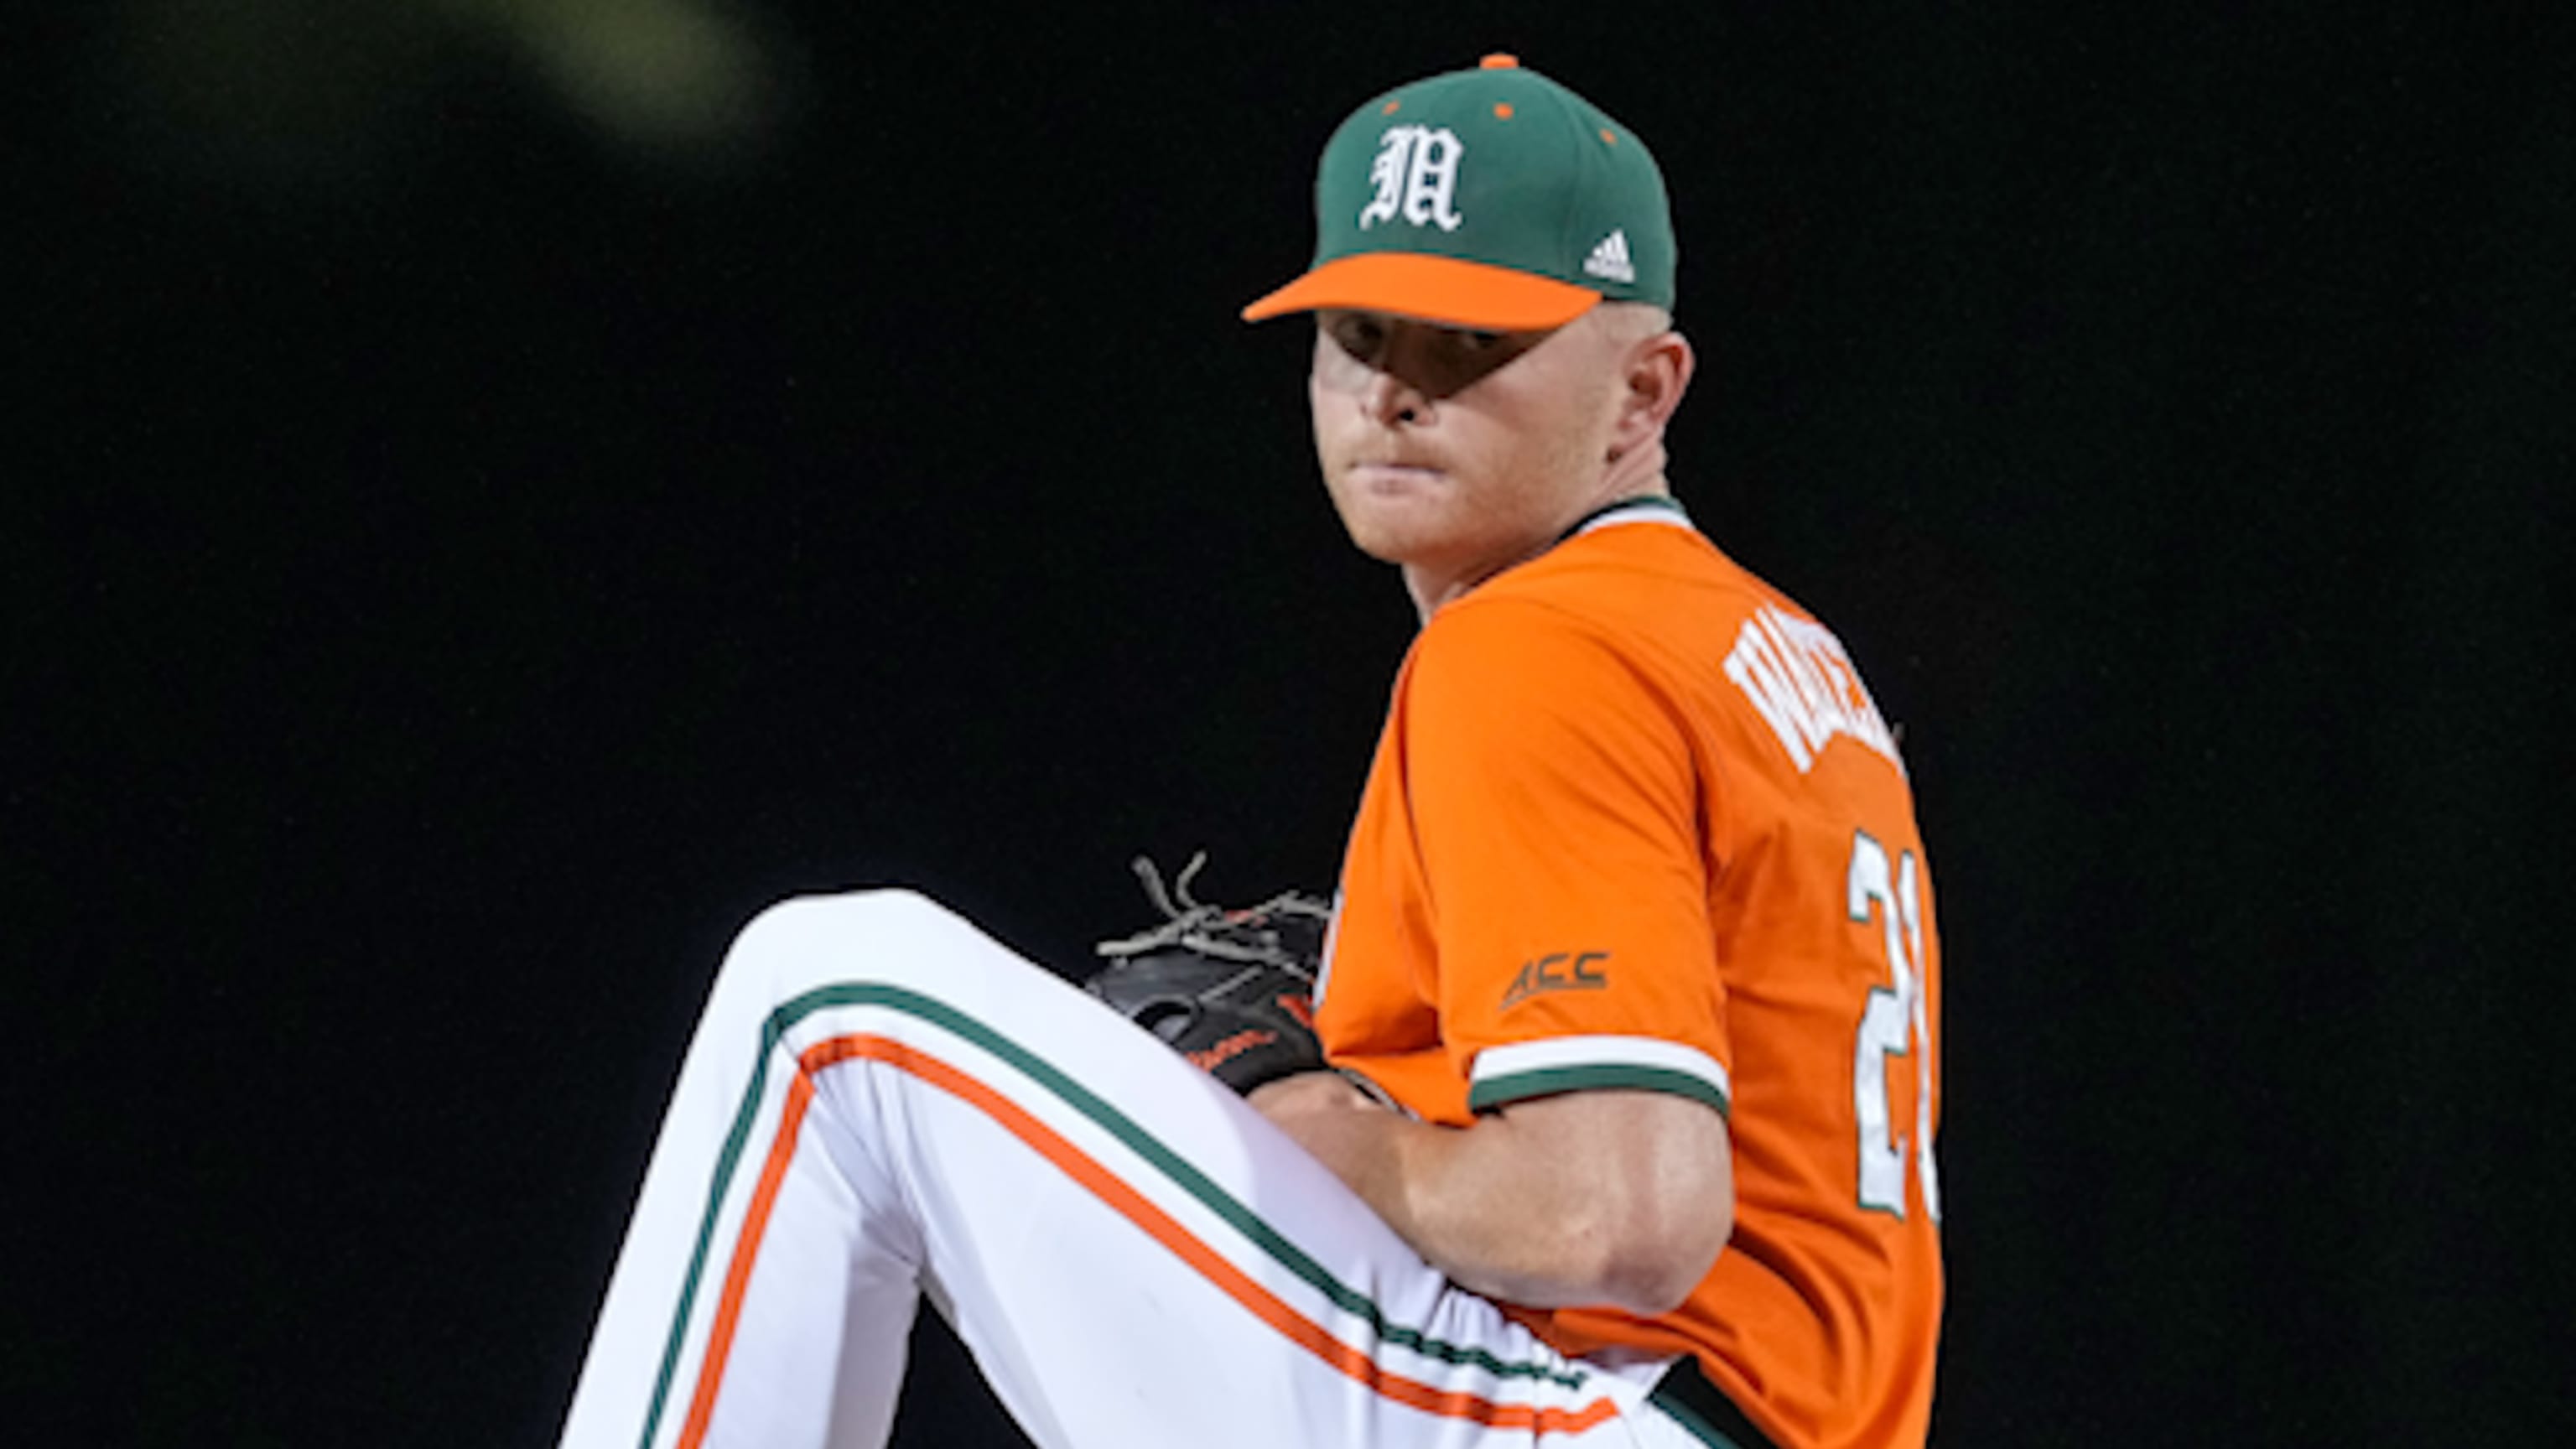 How to watch Miami Hurricanes in NCAA baseball regional on streaming